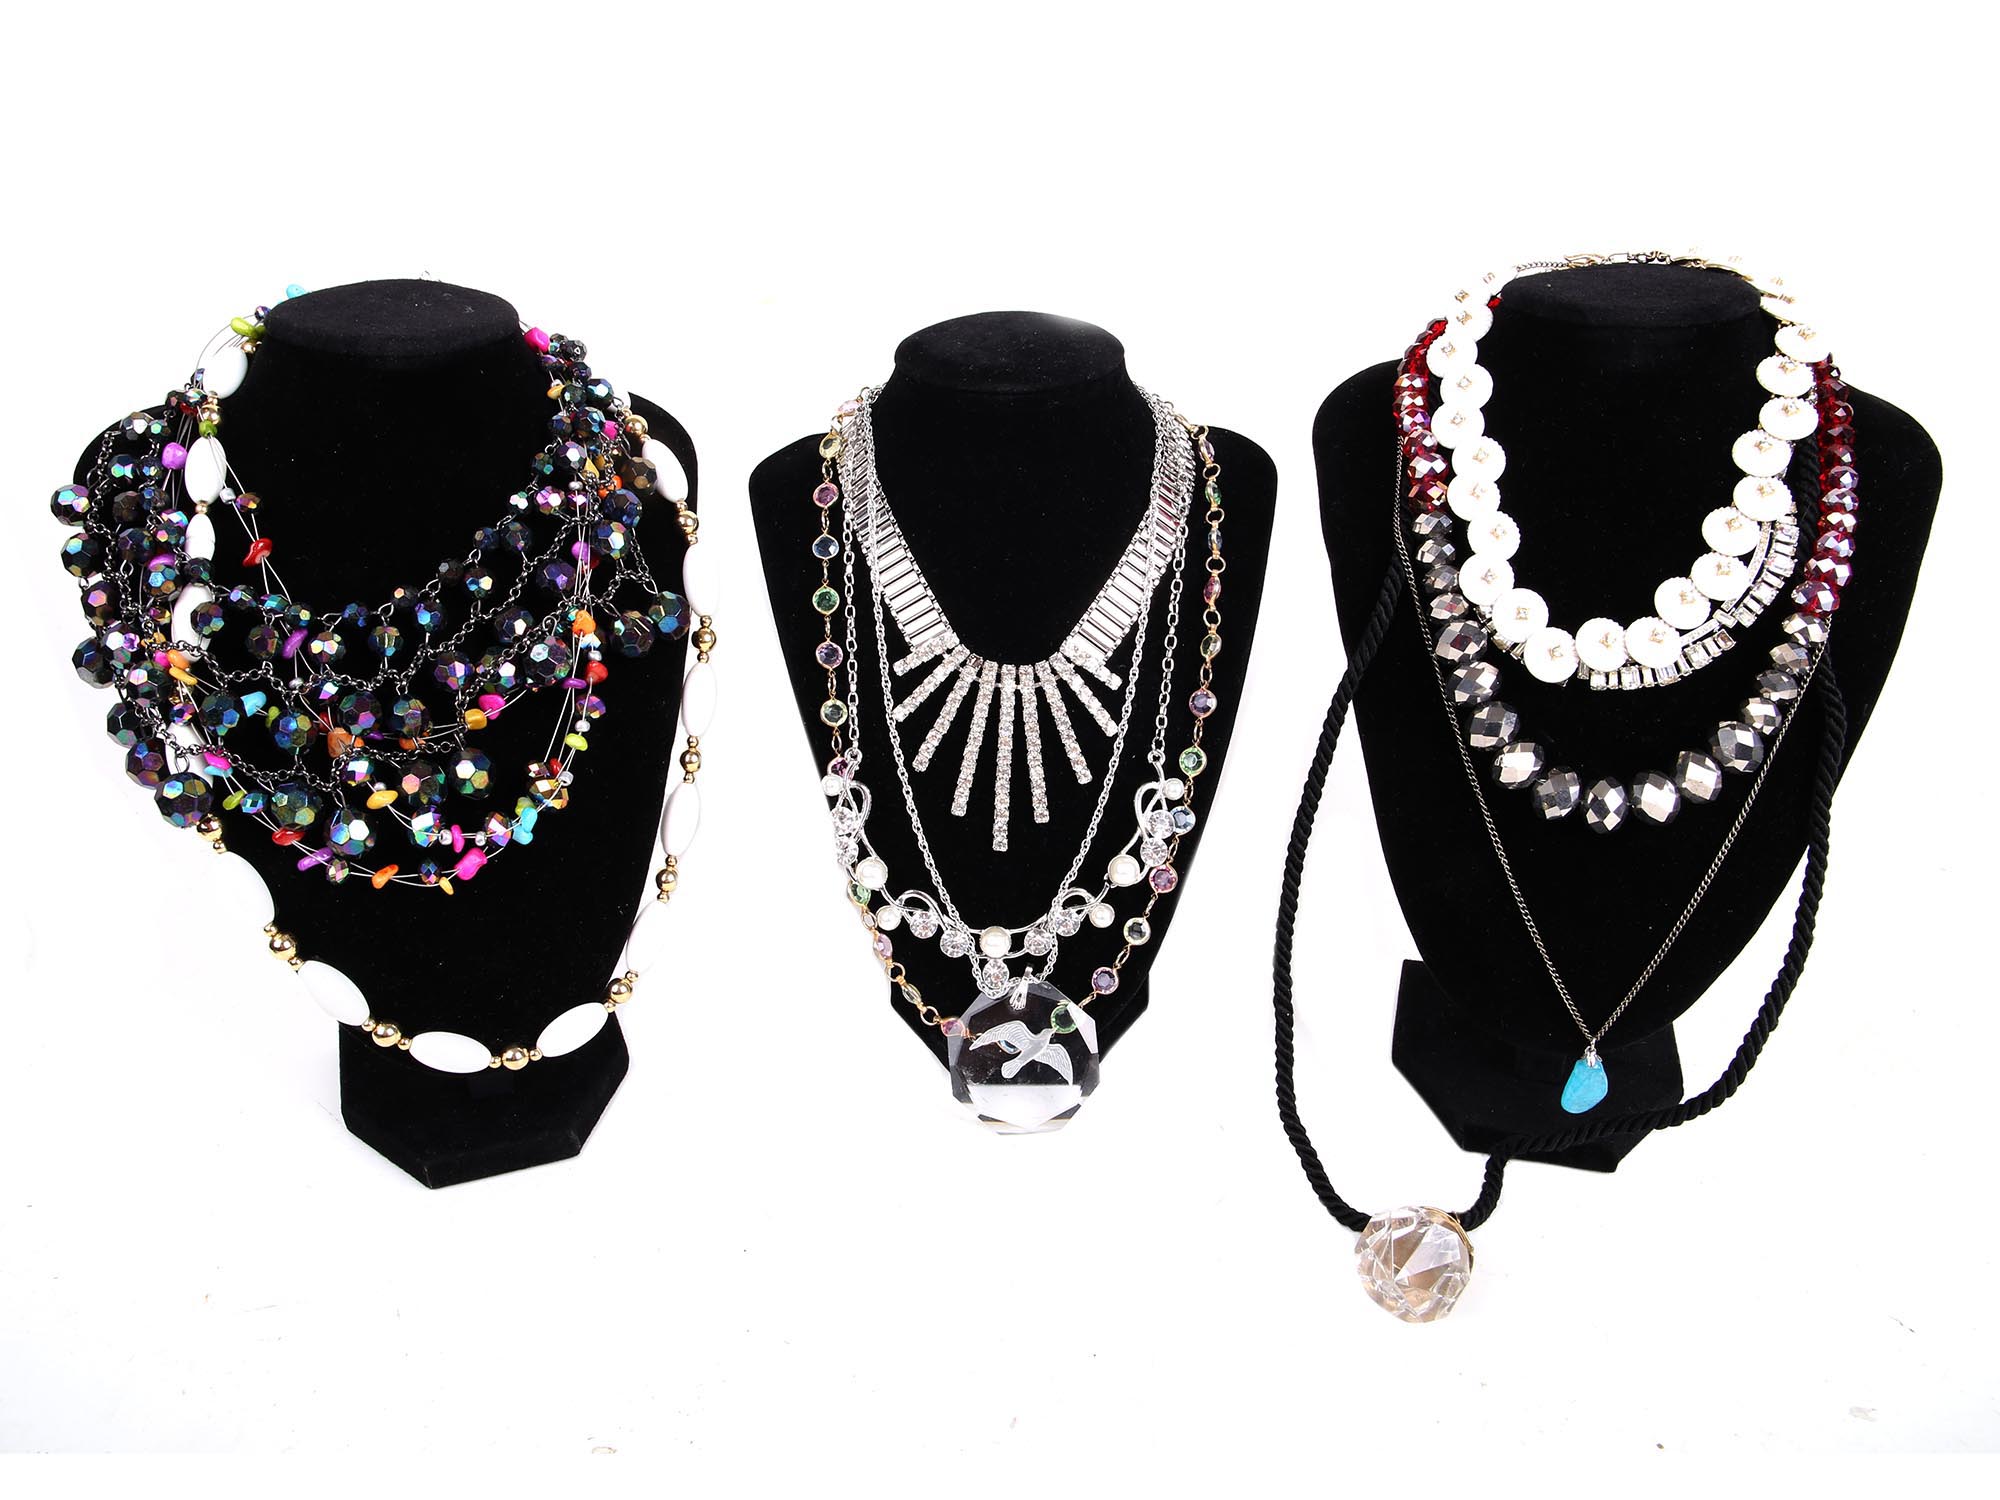 A LARGE COLLECTION OF COLORFUL COSTUME JEWELRY PIC-1